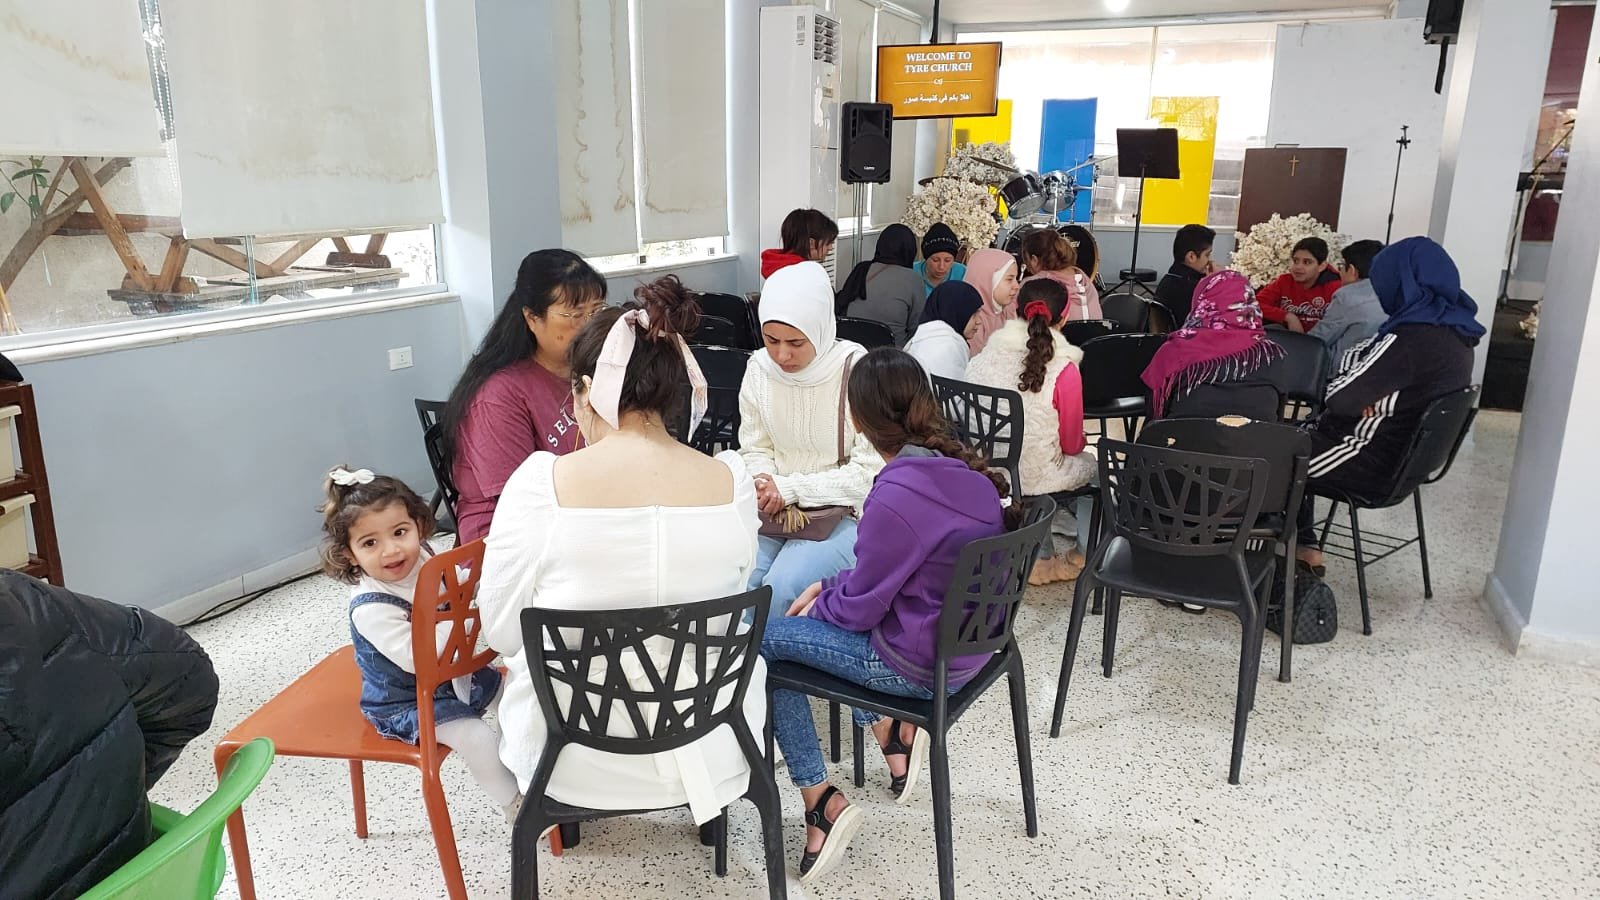 When believers gather to pray, it is a beautiful song to the Lord. His heart is pleased to hear his children. As these believers in Tyre pray together, please add them and their families to your prayer list this week. 

Pray for safety, protection, a